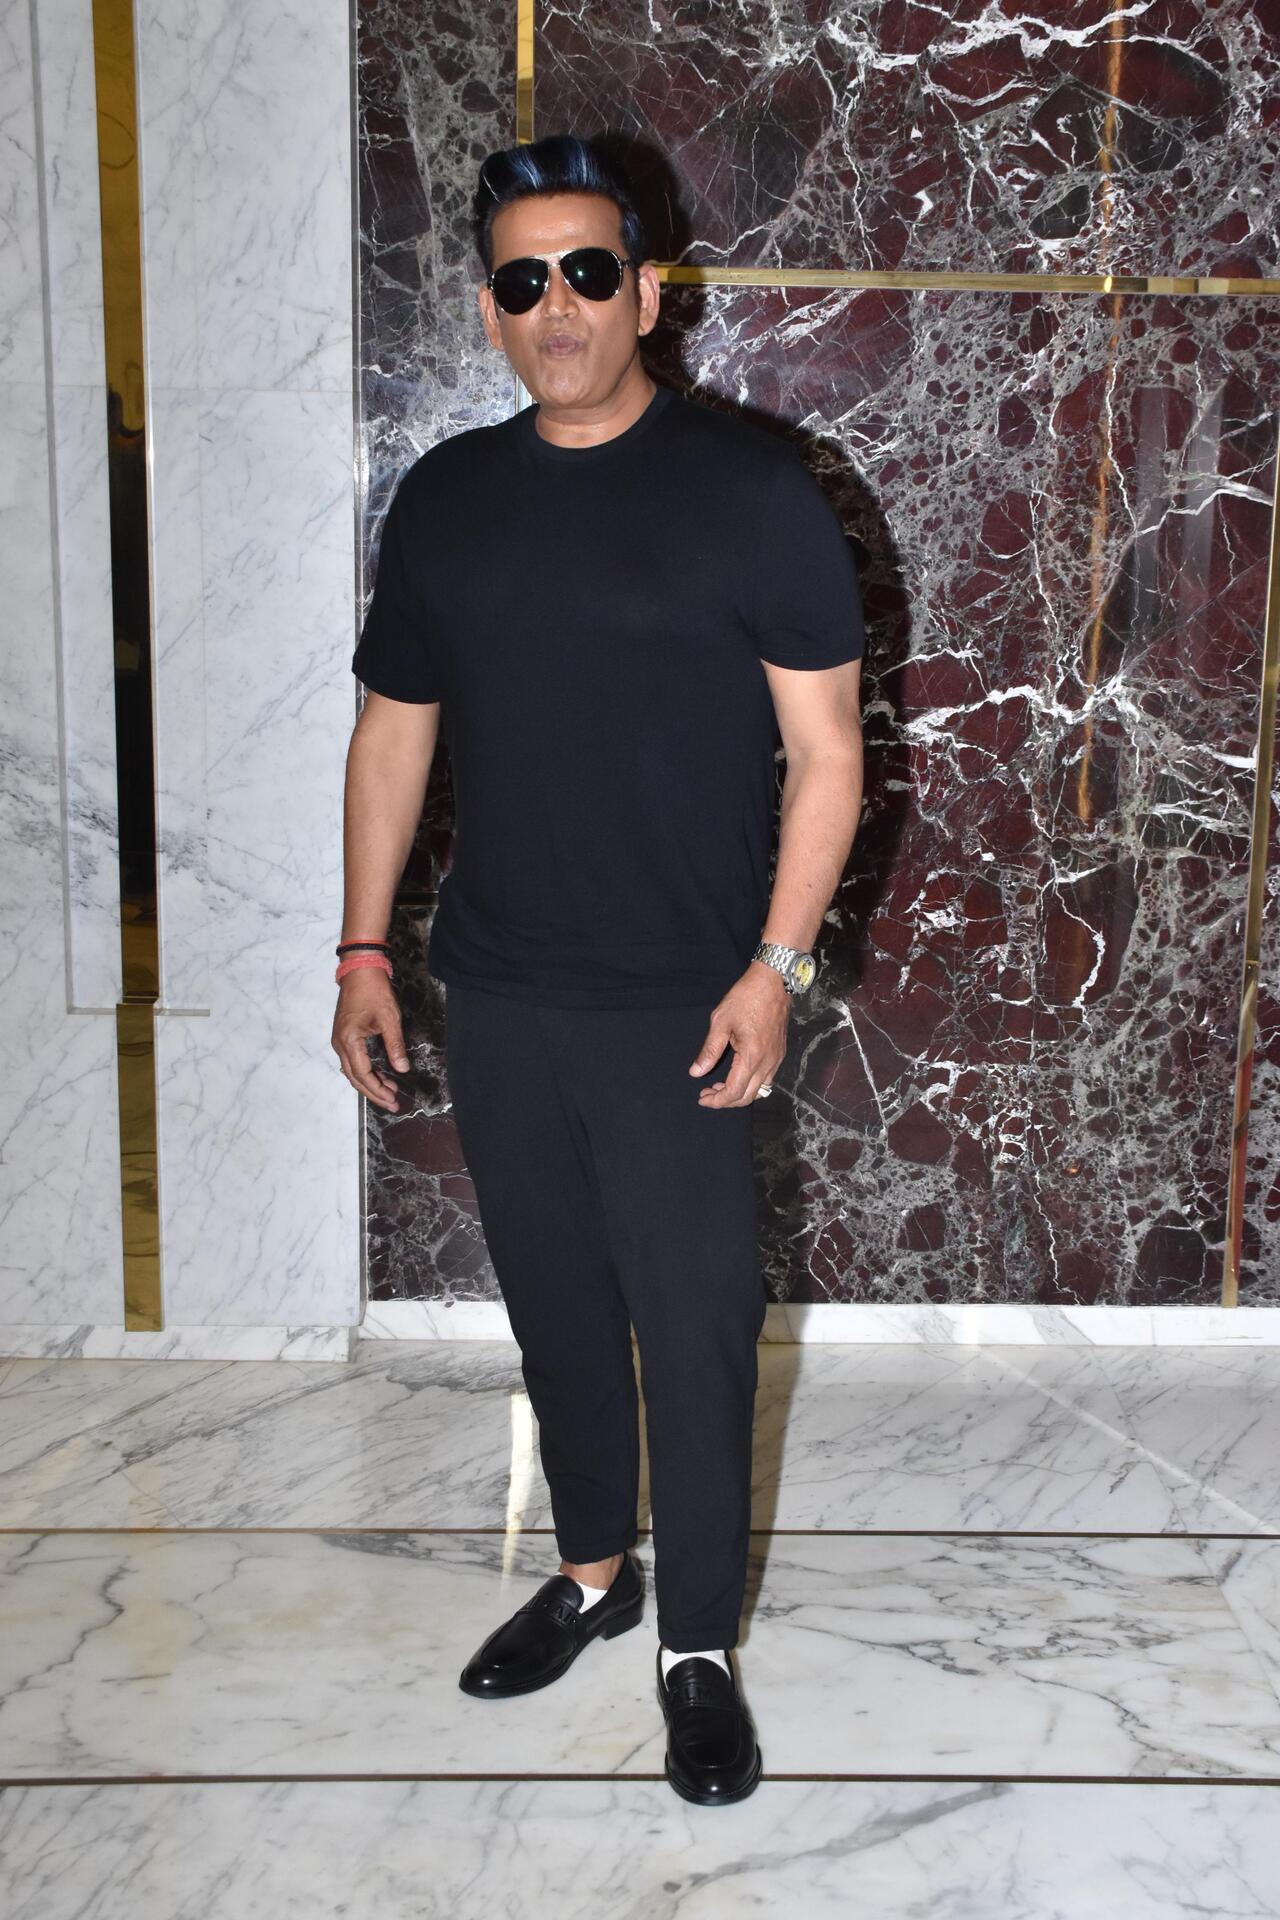 Ravi Kishan was spotted in blue hair highlights in the city